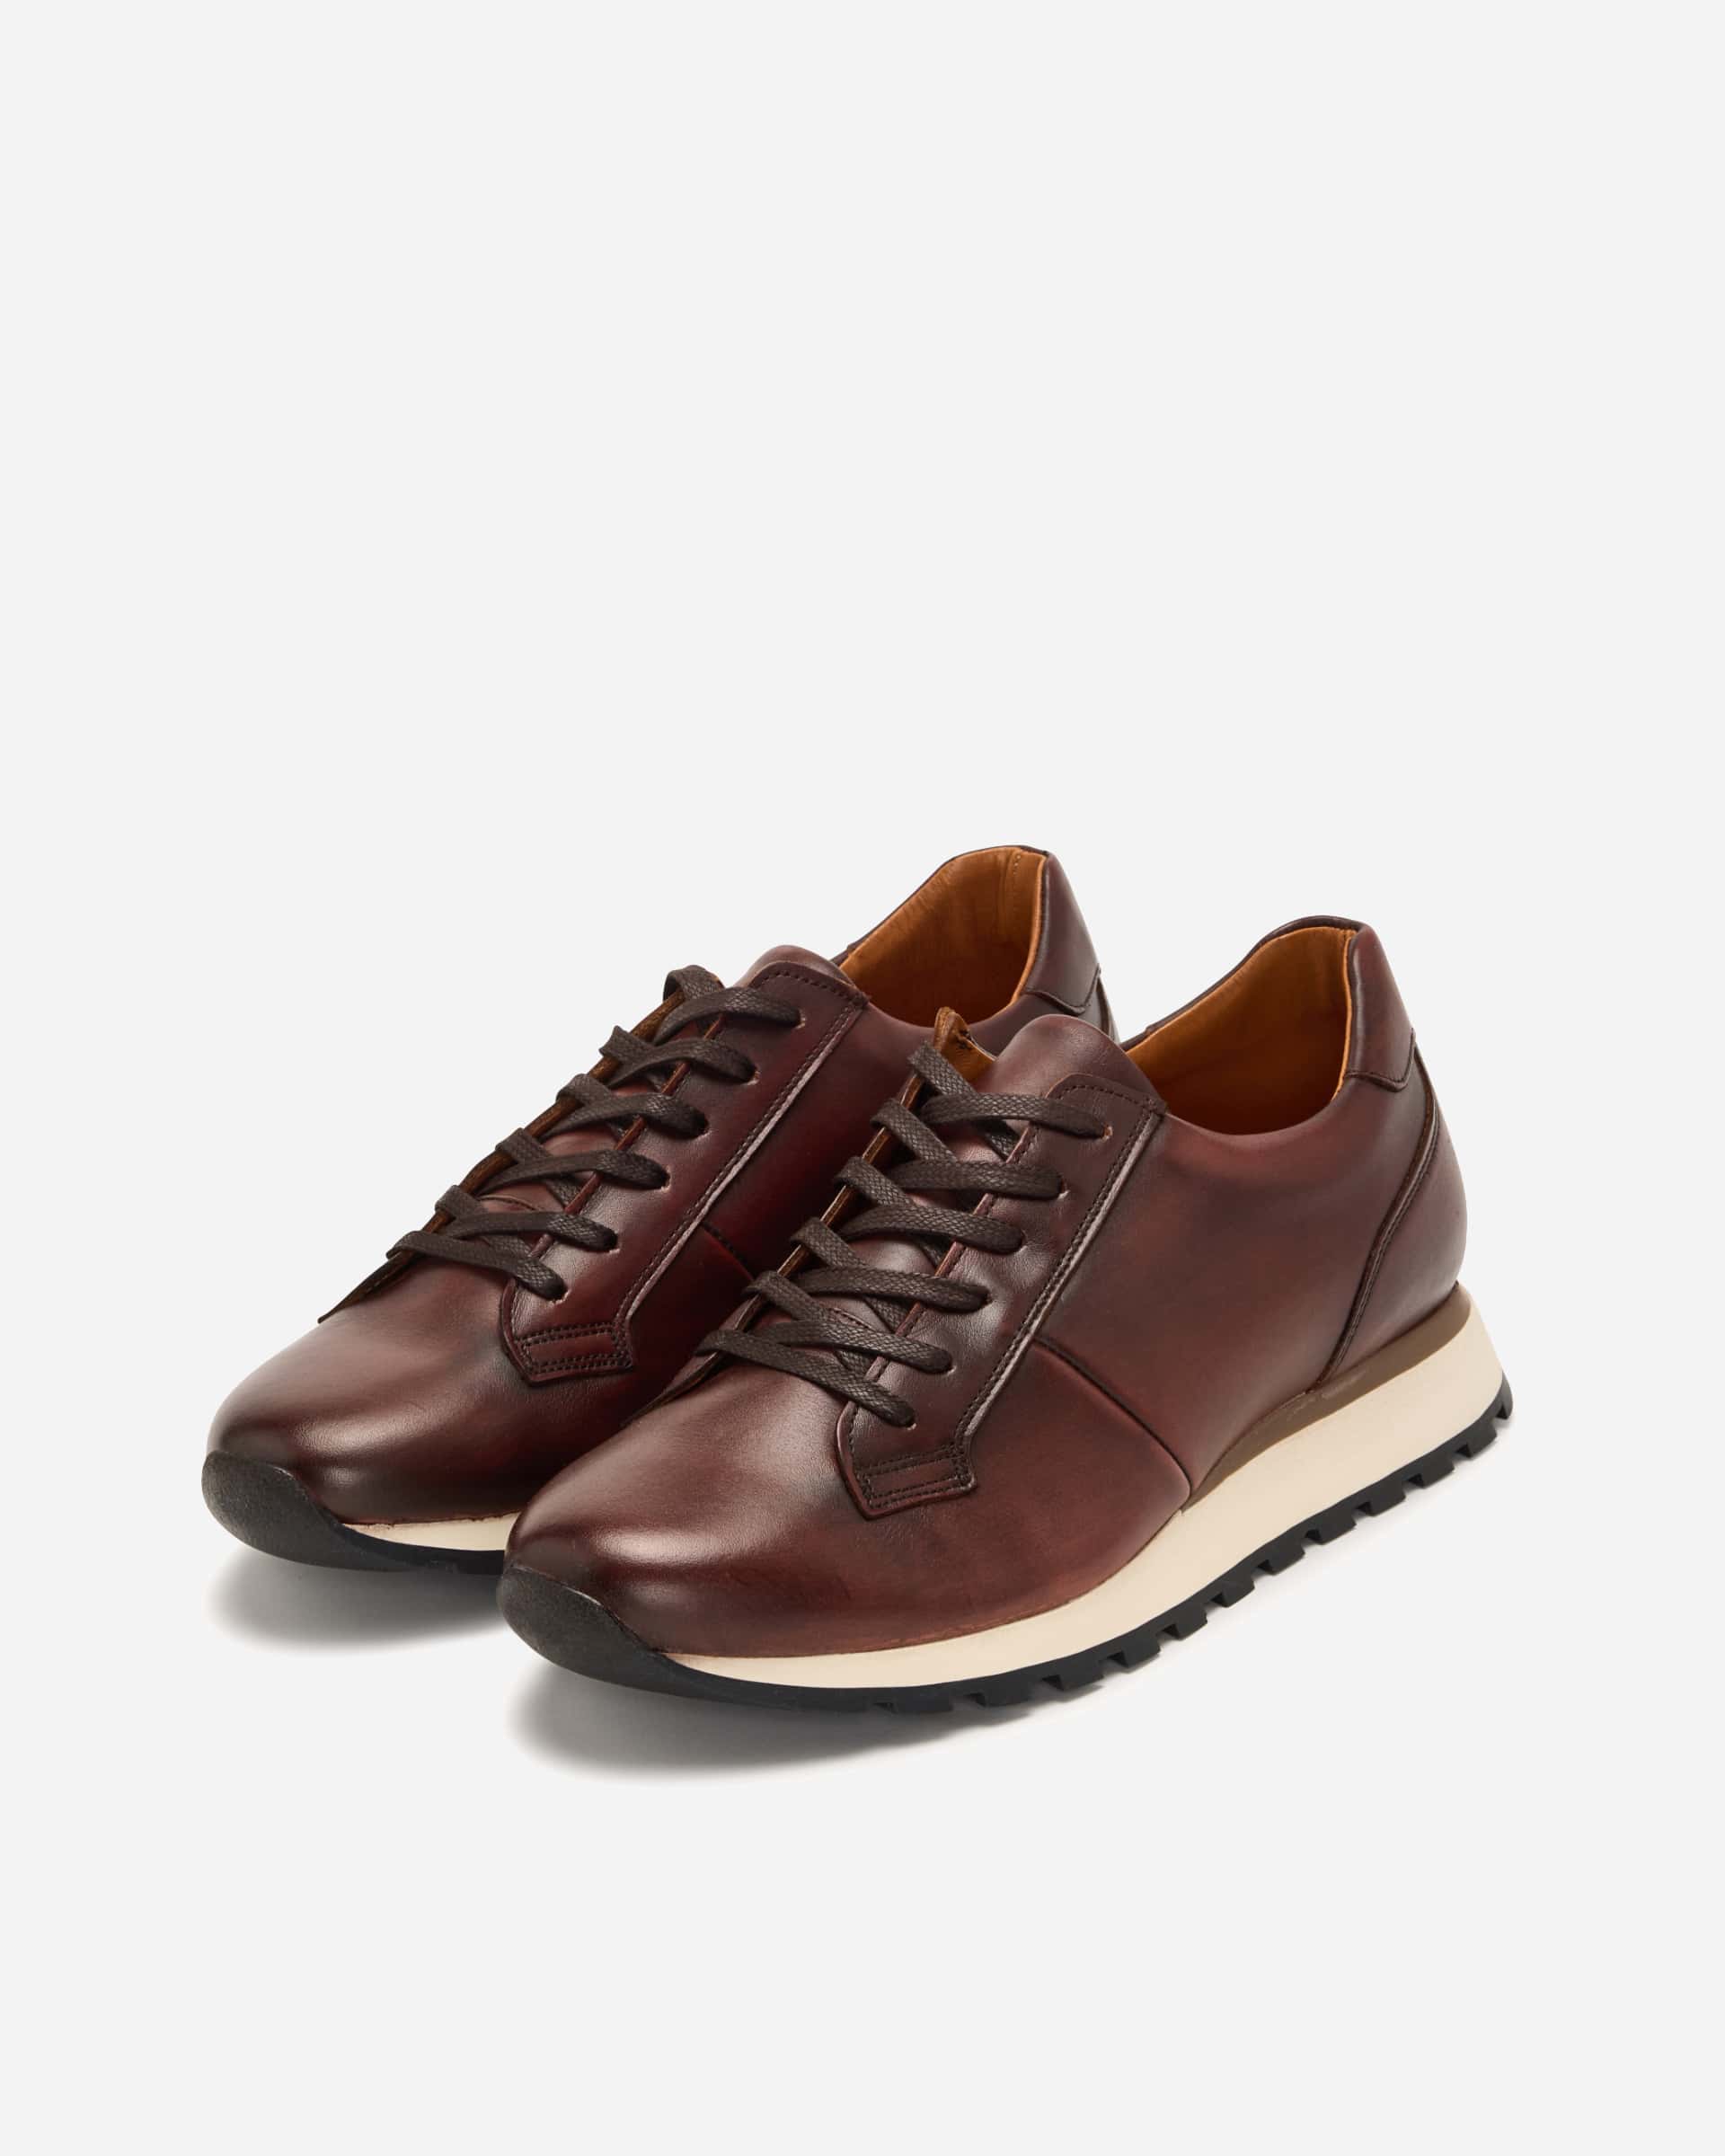 Sports Leather Sneaker - Men's Sneakers at Menzclub